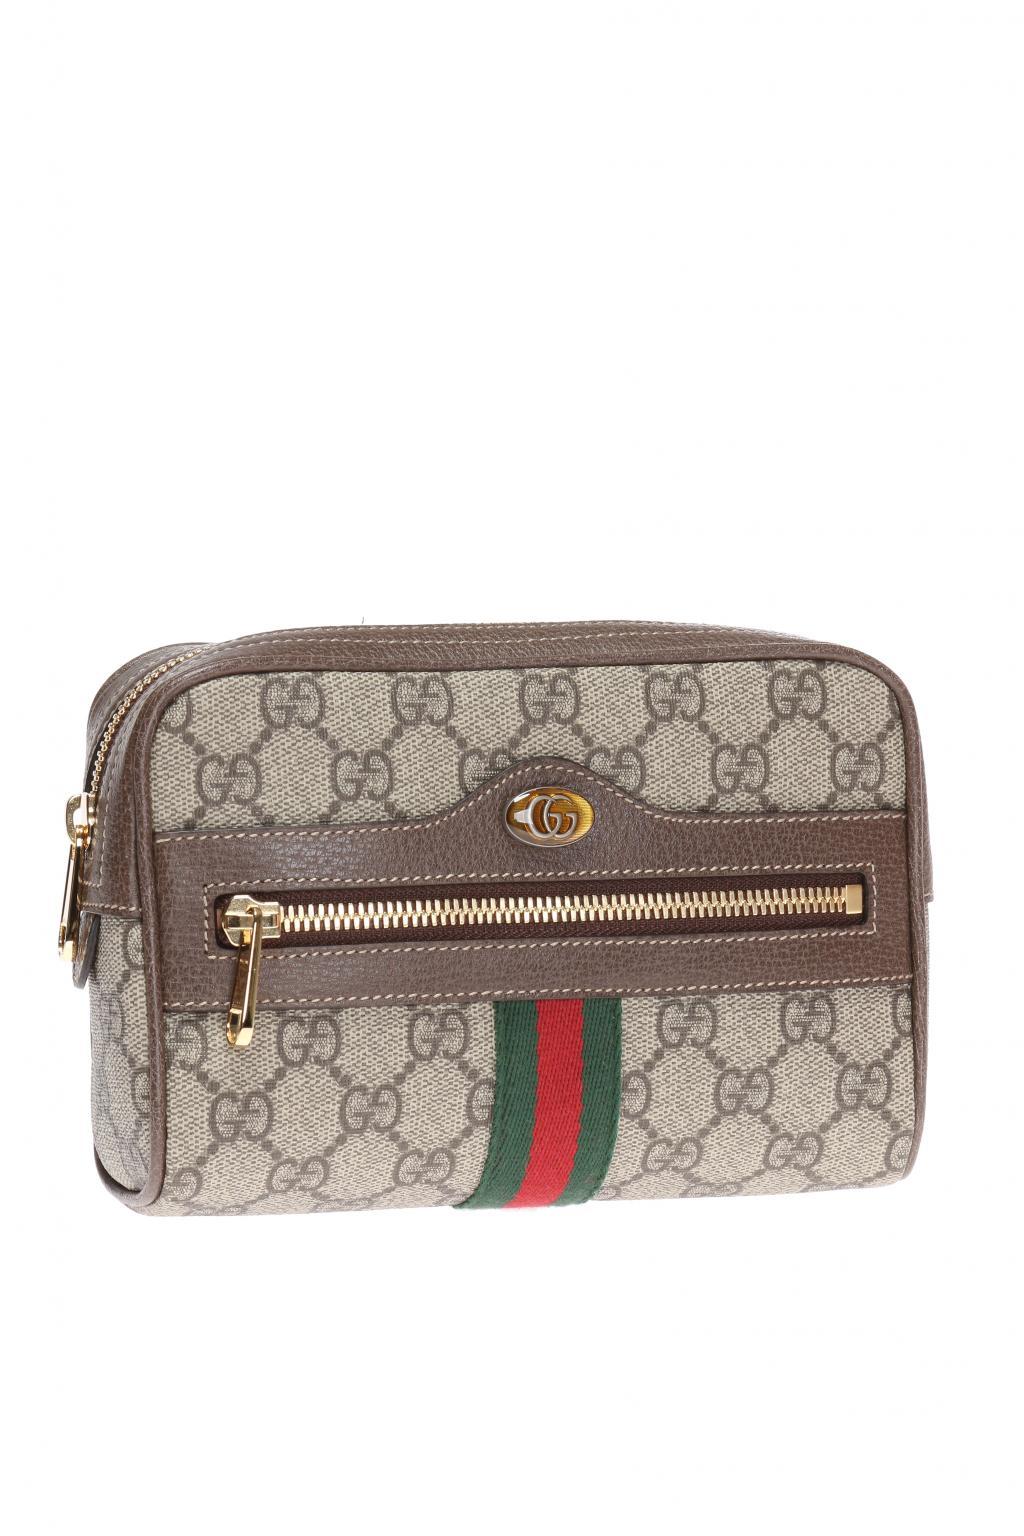 Gucci Canvas Ophidia GG Supreme Small Belt Bag Bag in Brown | Lyst